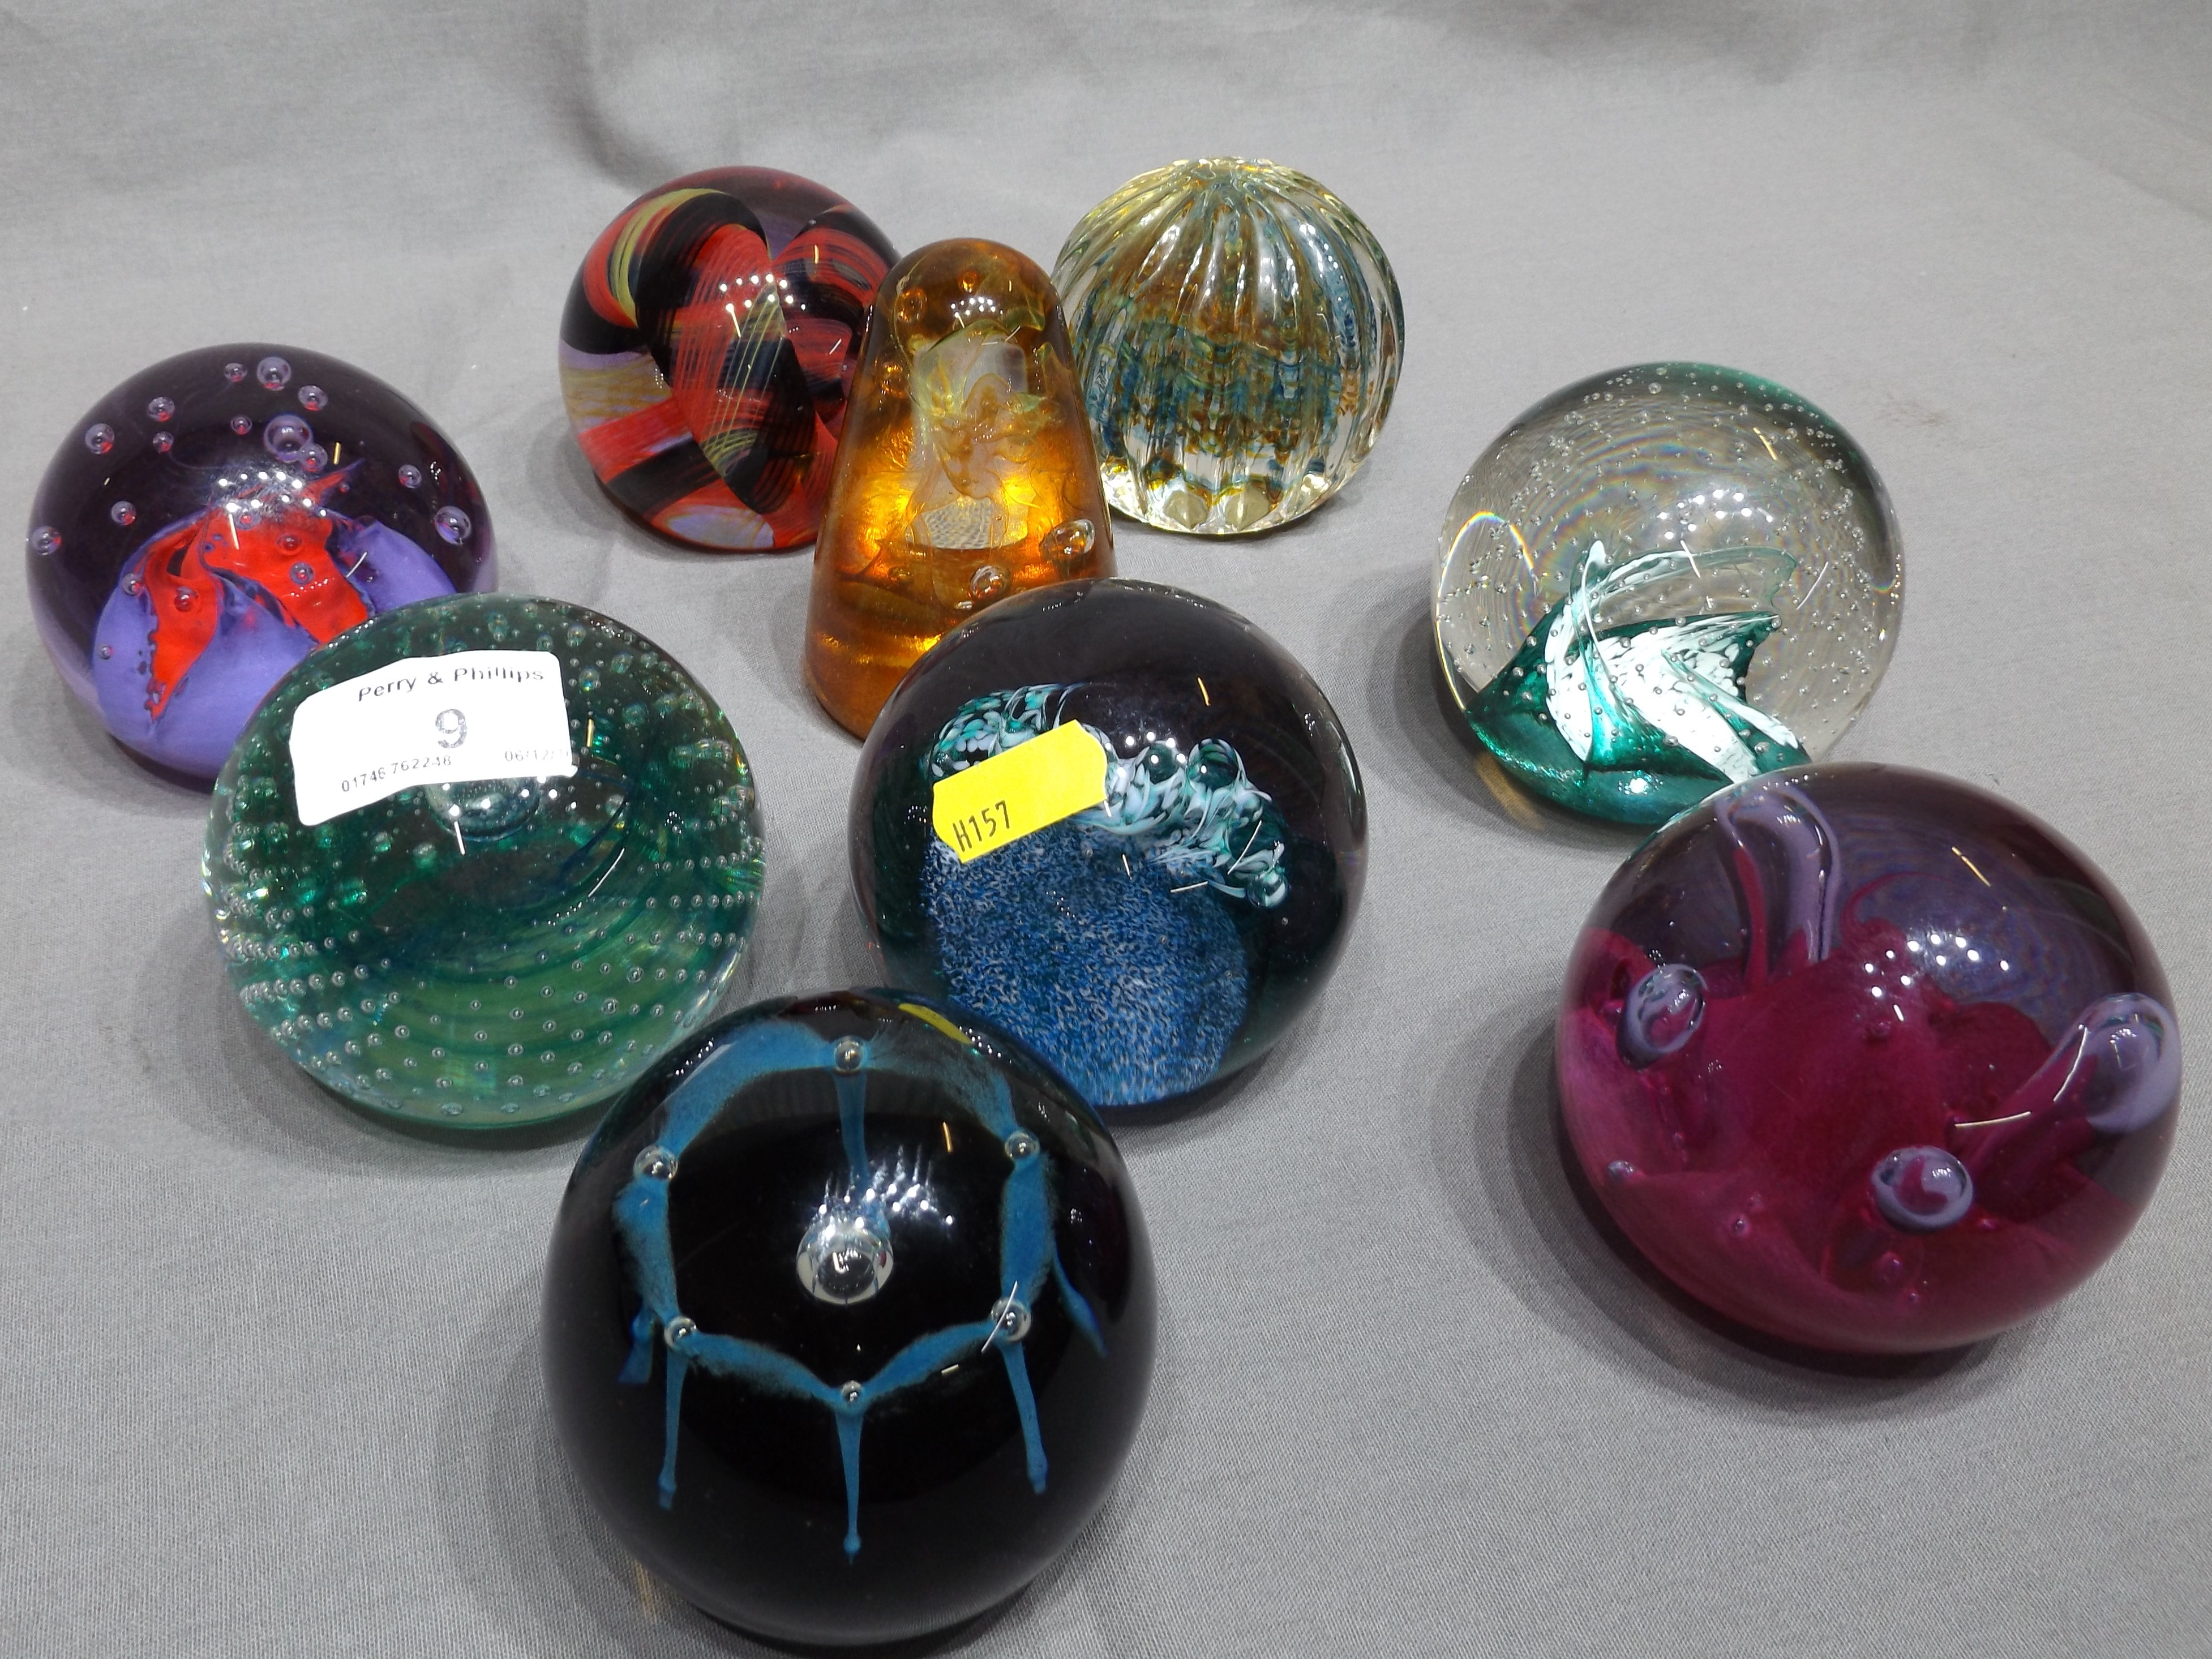 Nine Assorted Caithness Paperweights, all signed with various patterns